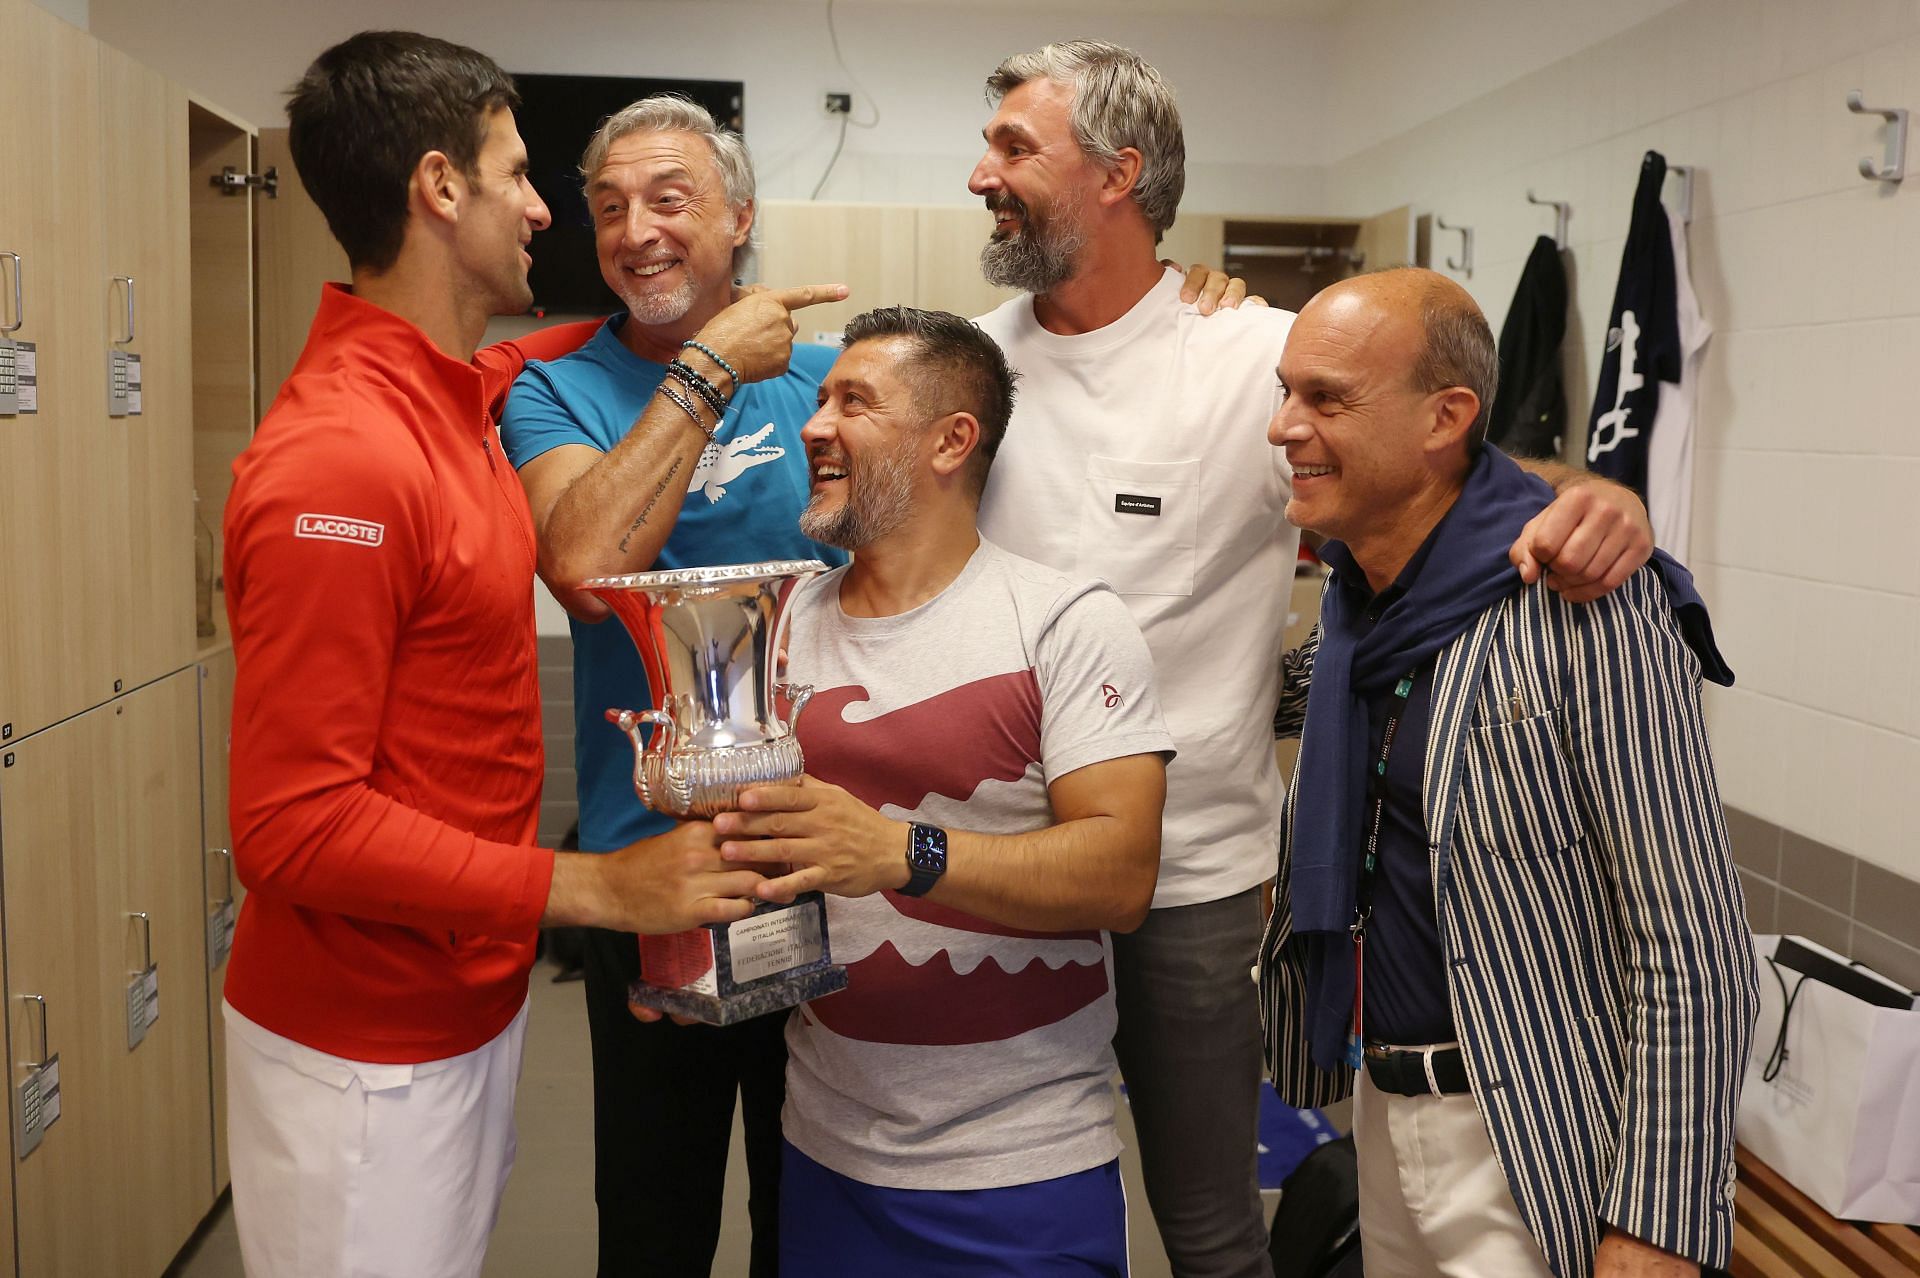 Djokovic with his team after the win in Rome